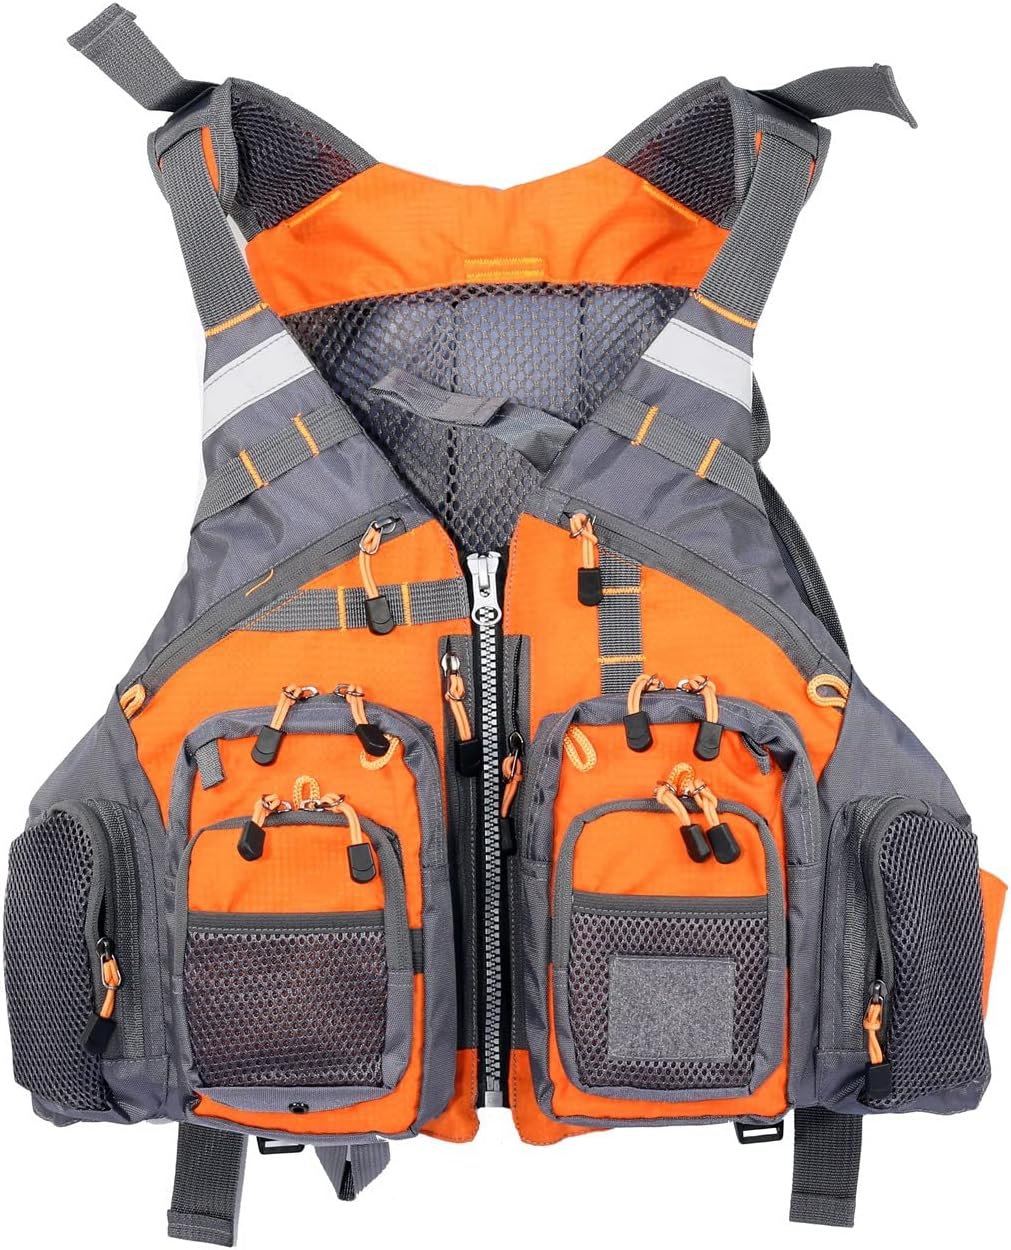 Fly Fishing Vest Fishing Safety Life Jacket for Swimming Sailing Boating Kayak Floating Multifunction Breathable Backpack for Men and Women Kayak Vest Swim Vest - Fly Fishing Vest Review